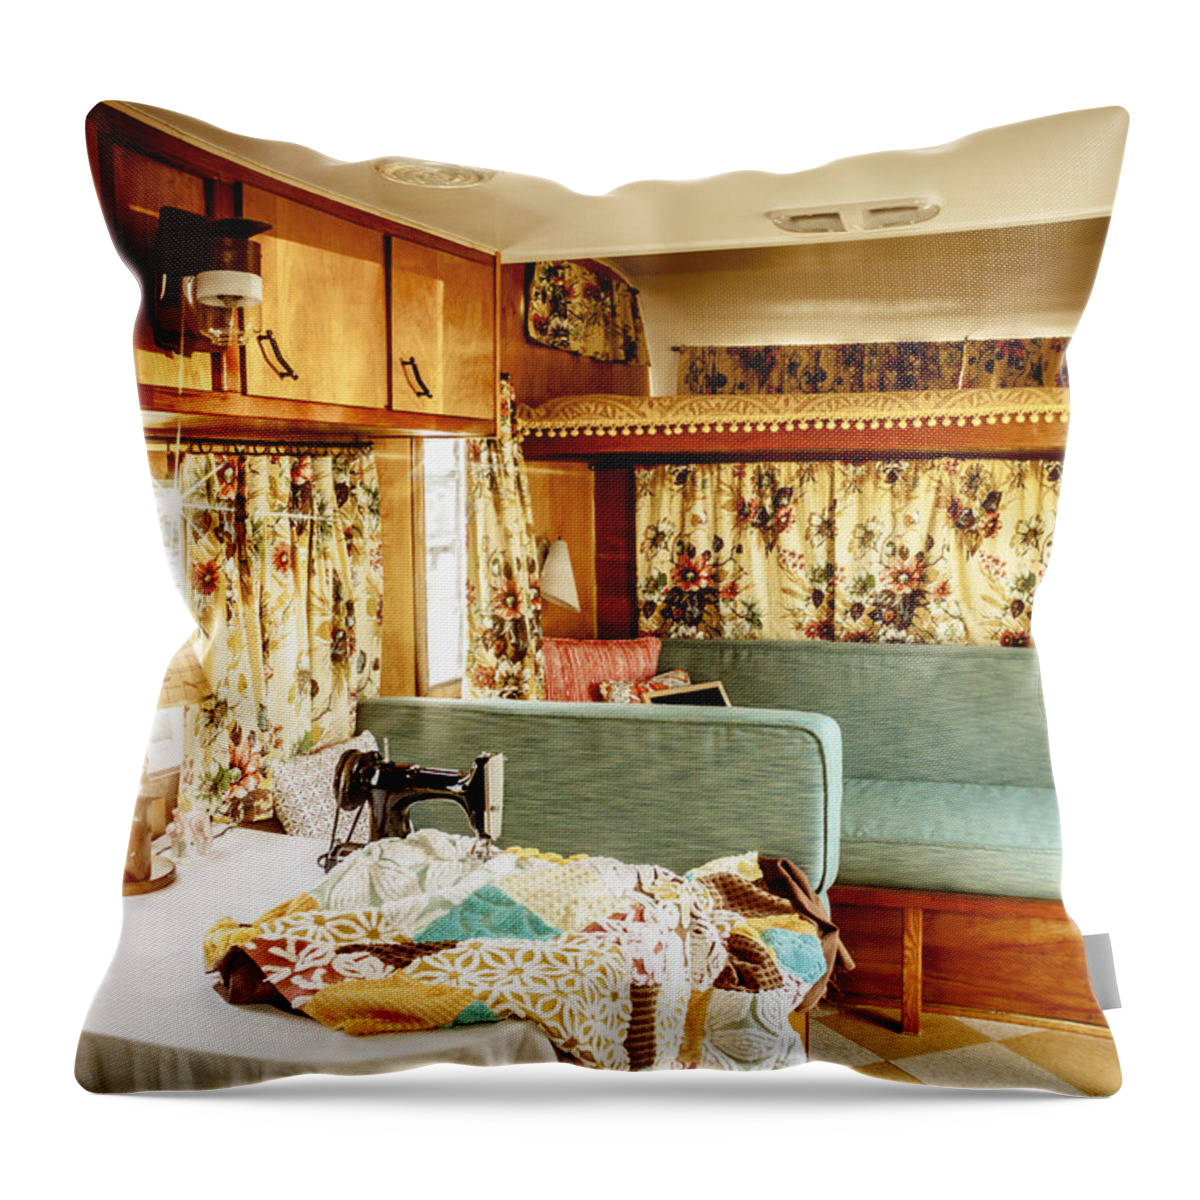 Camping Throw Pillow featuring the photograph Frolic by Debra Forand